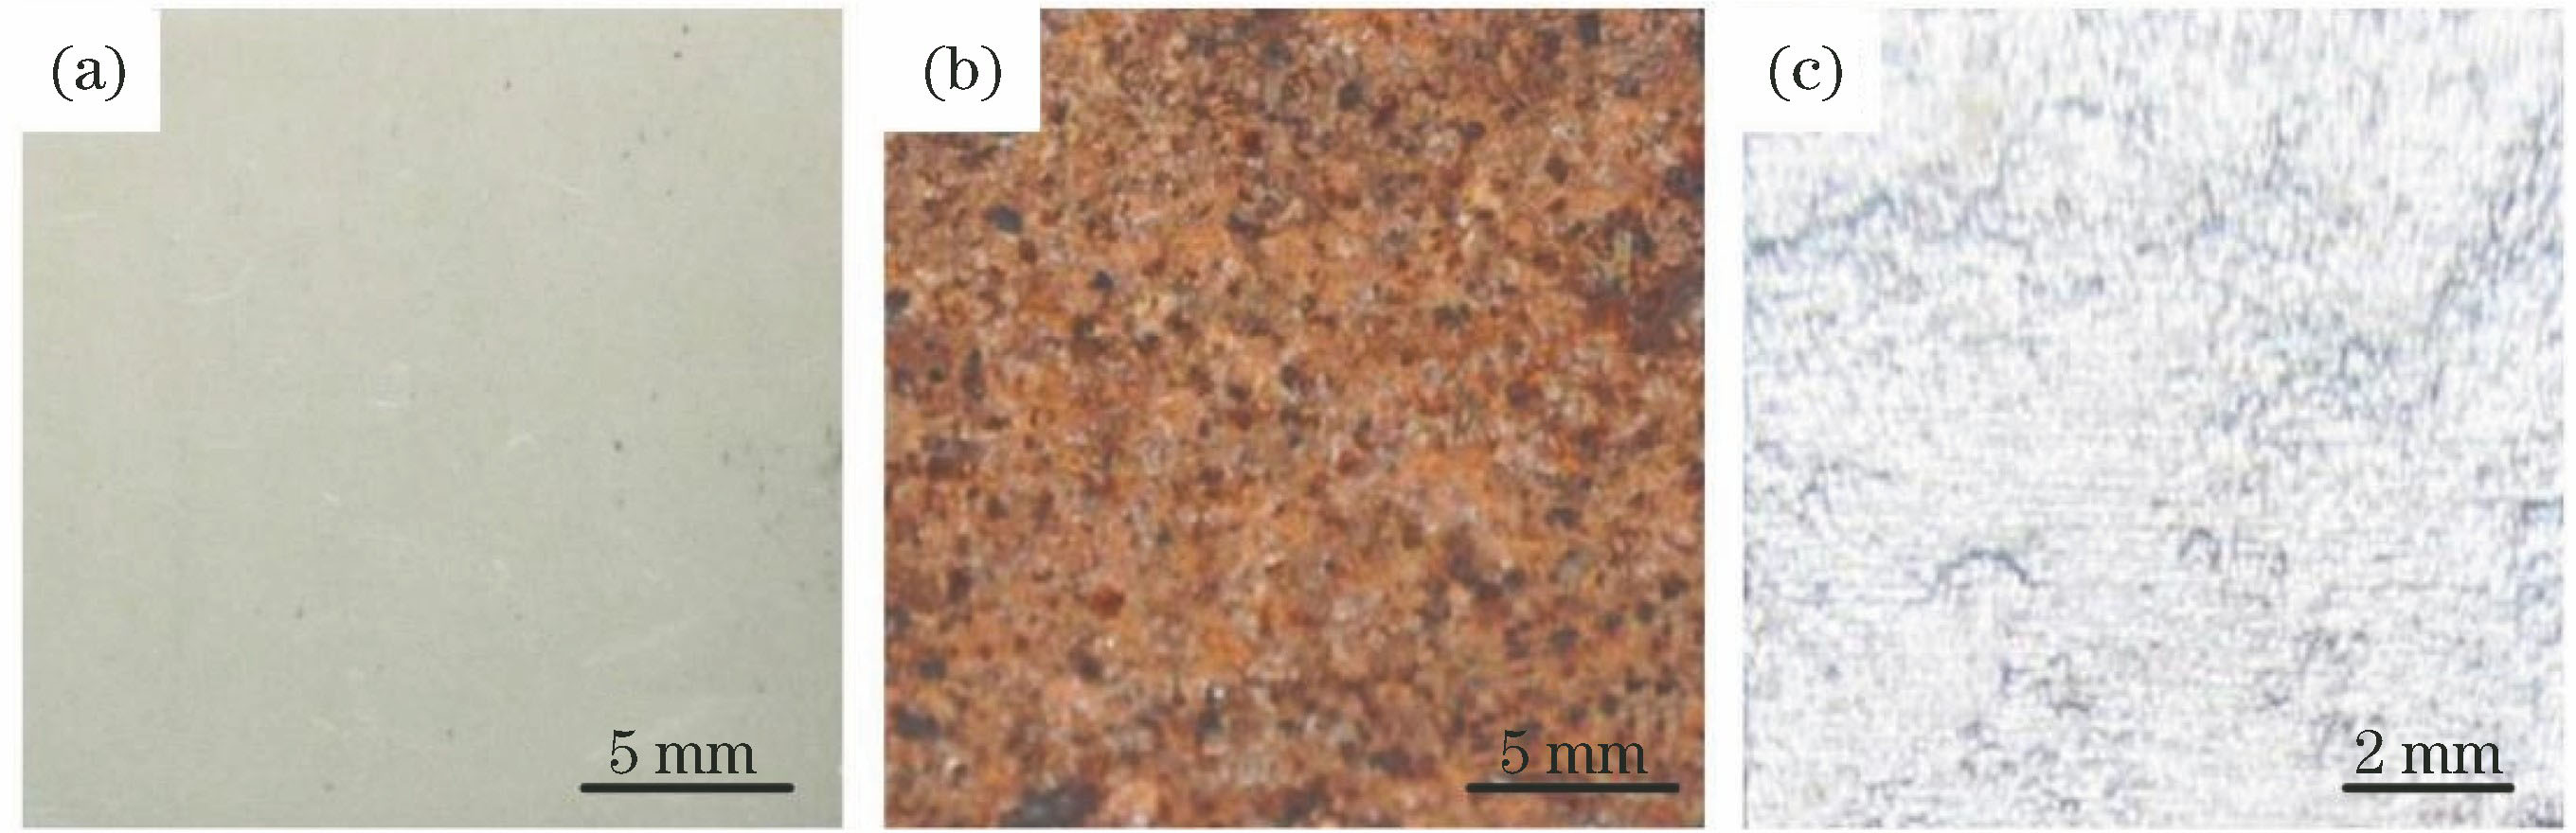 Macroscopic morphologies of samples under different conditions.(a) Sample of original matrix; (b) rust sample; (c) sample of laser cleaning